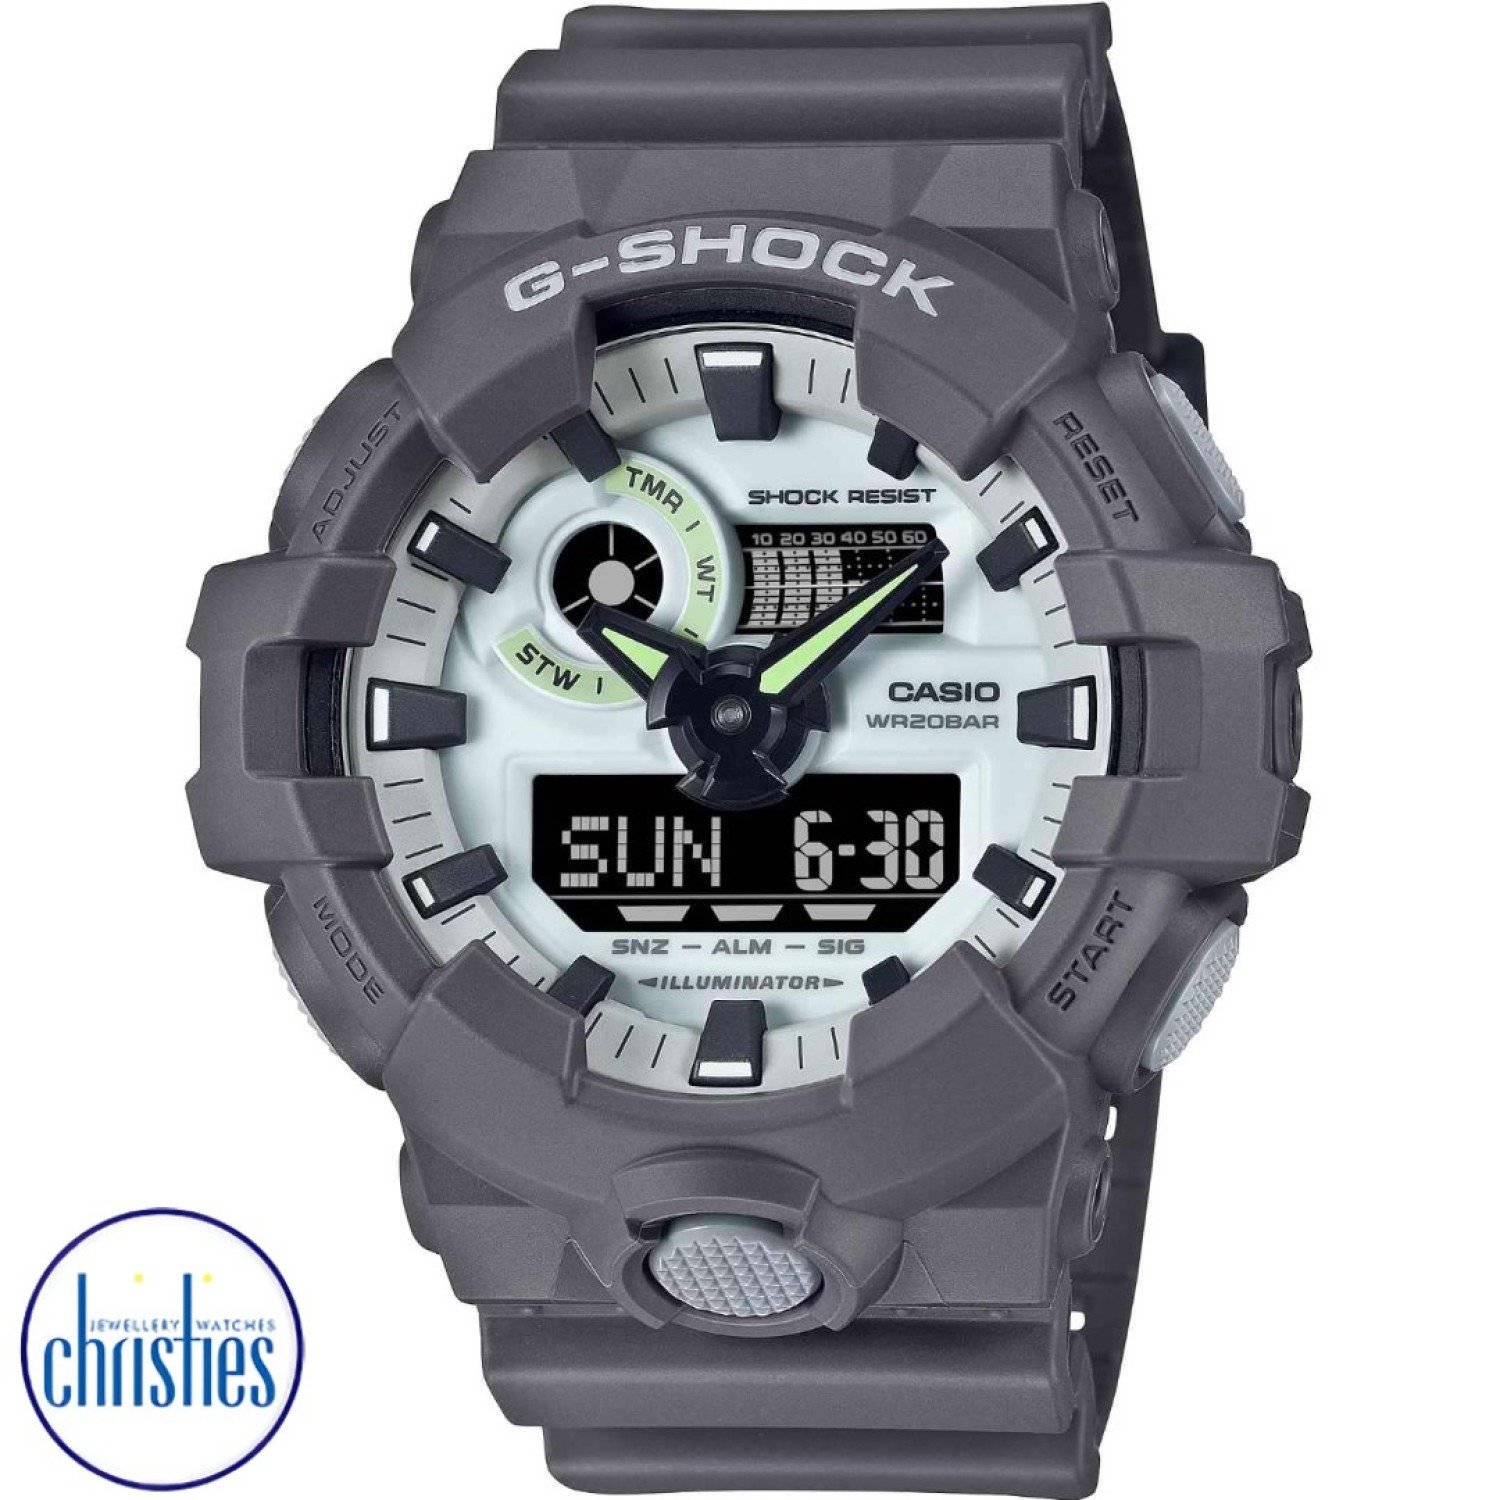 GA700HD-8A G-Shock Hidden Glow Series Watch | FREE Delivery | G-Shock: rugged precision meets festive discounts for a timepiece that stands out.